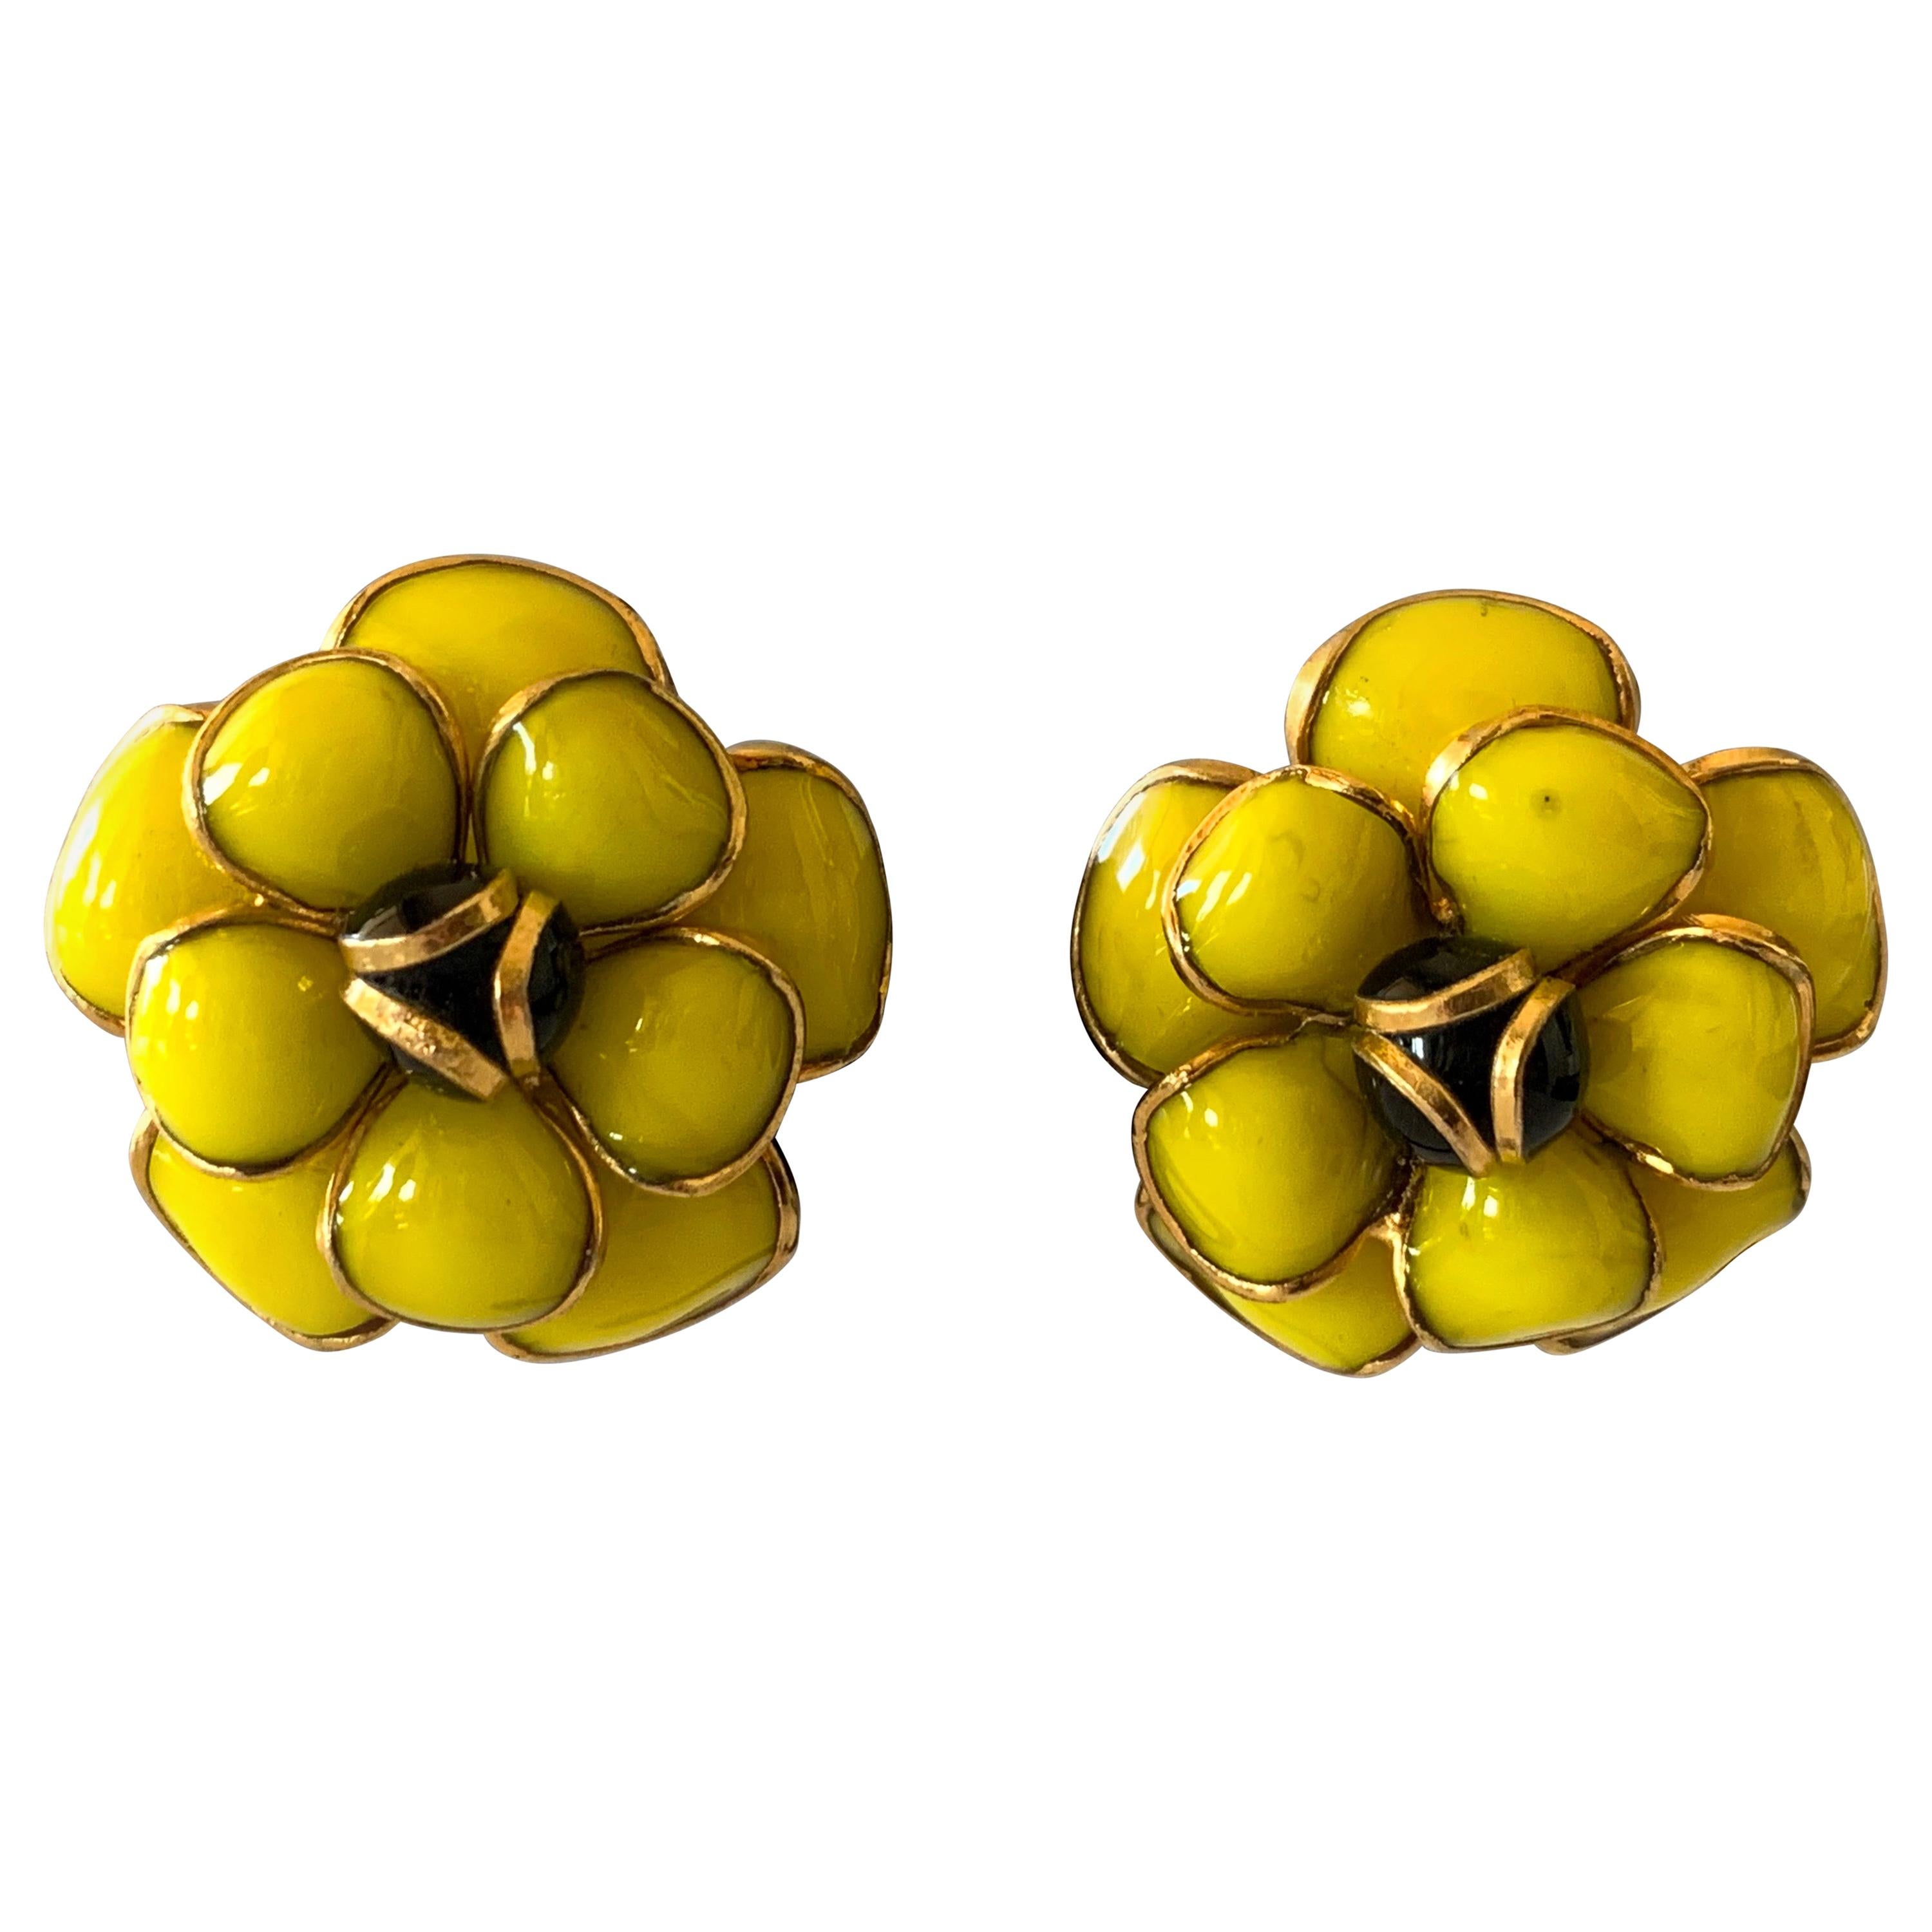 Black and Yellow Camellia "pate de verre" Statement Earrings 